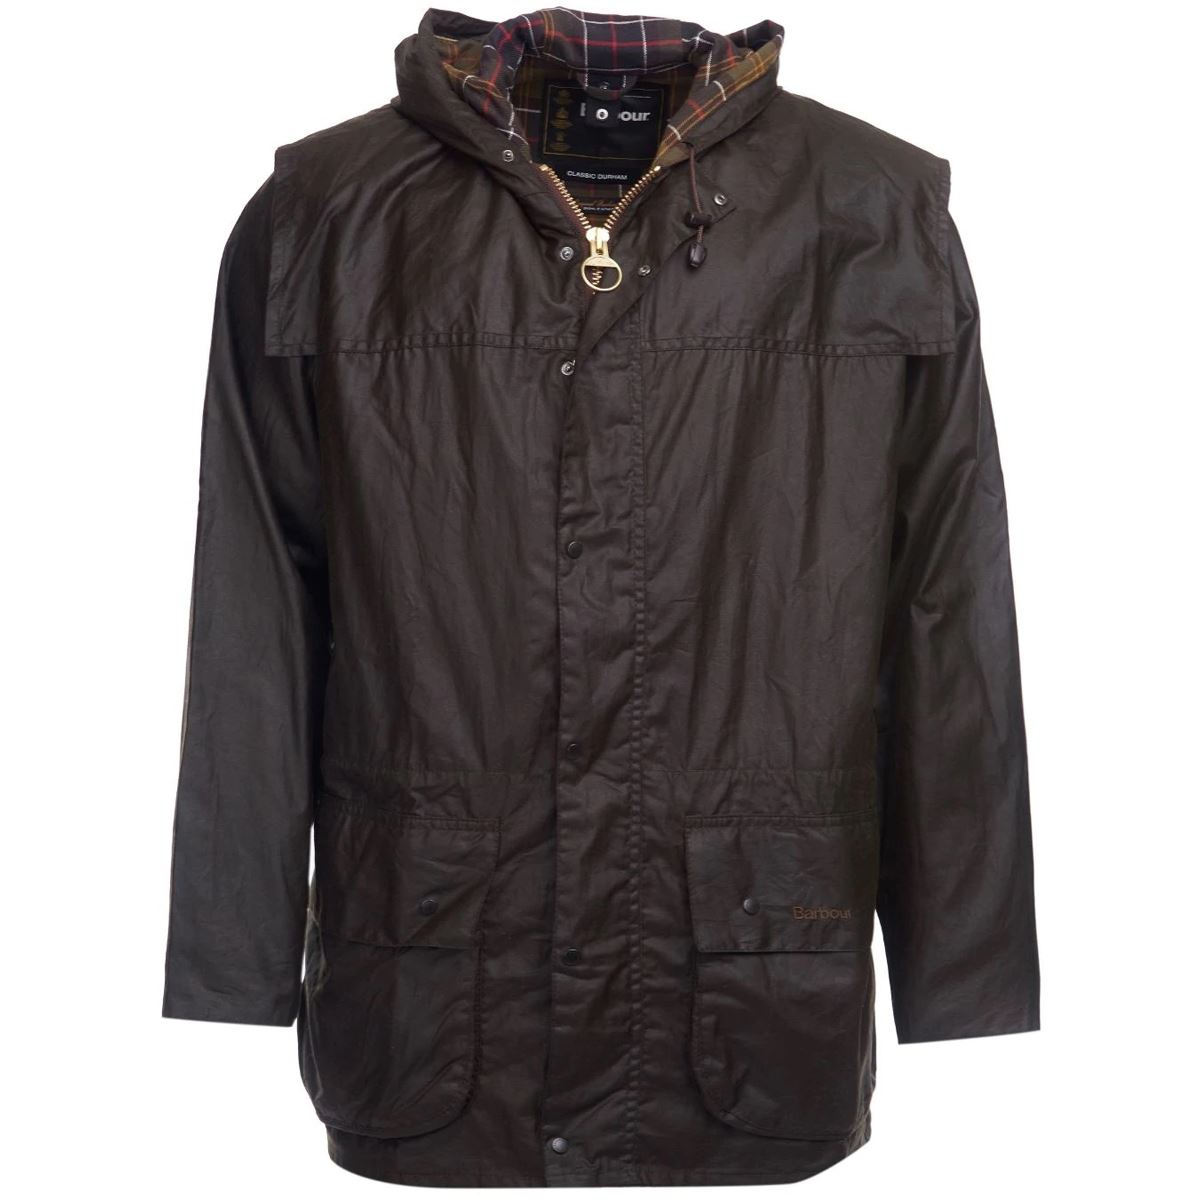 Does the Barbour Durham Jacket withstand the elements?